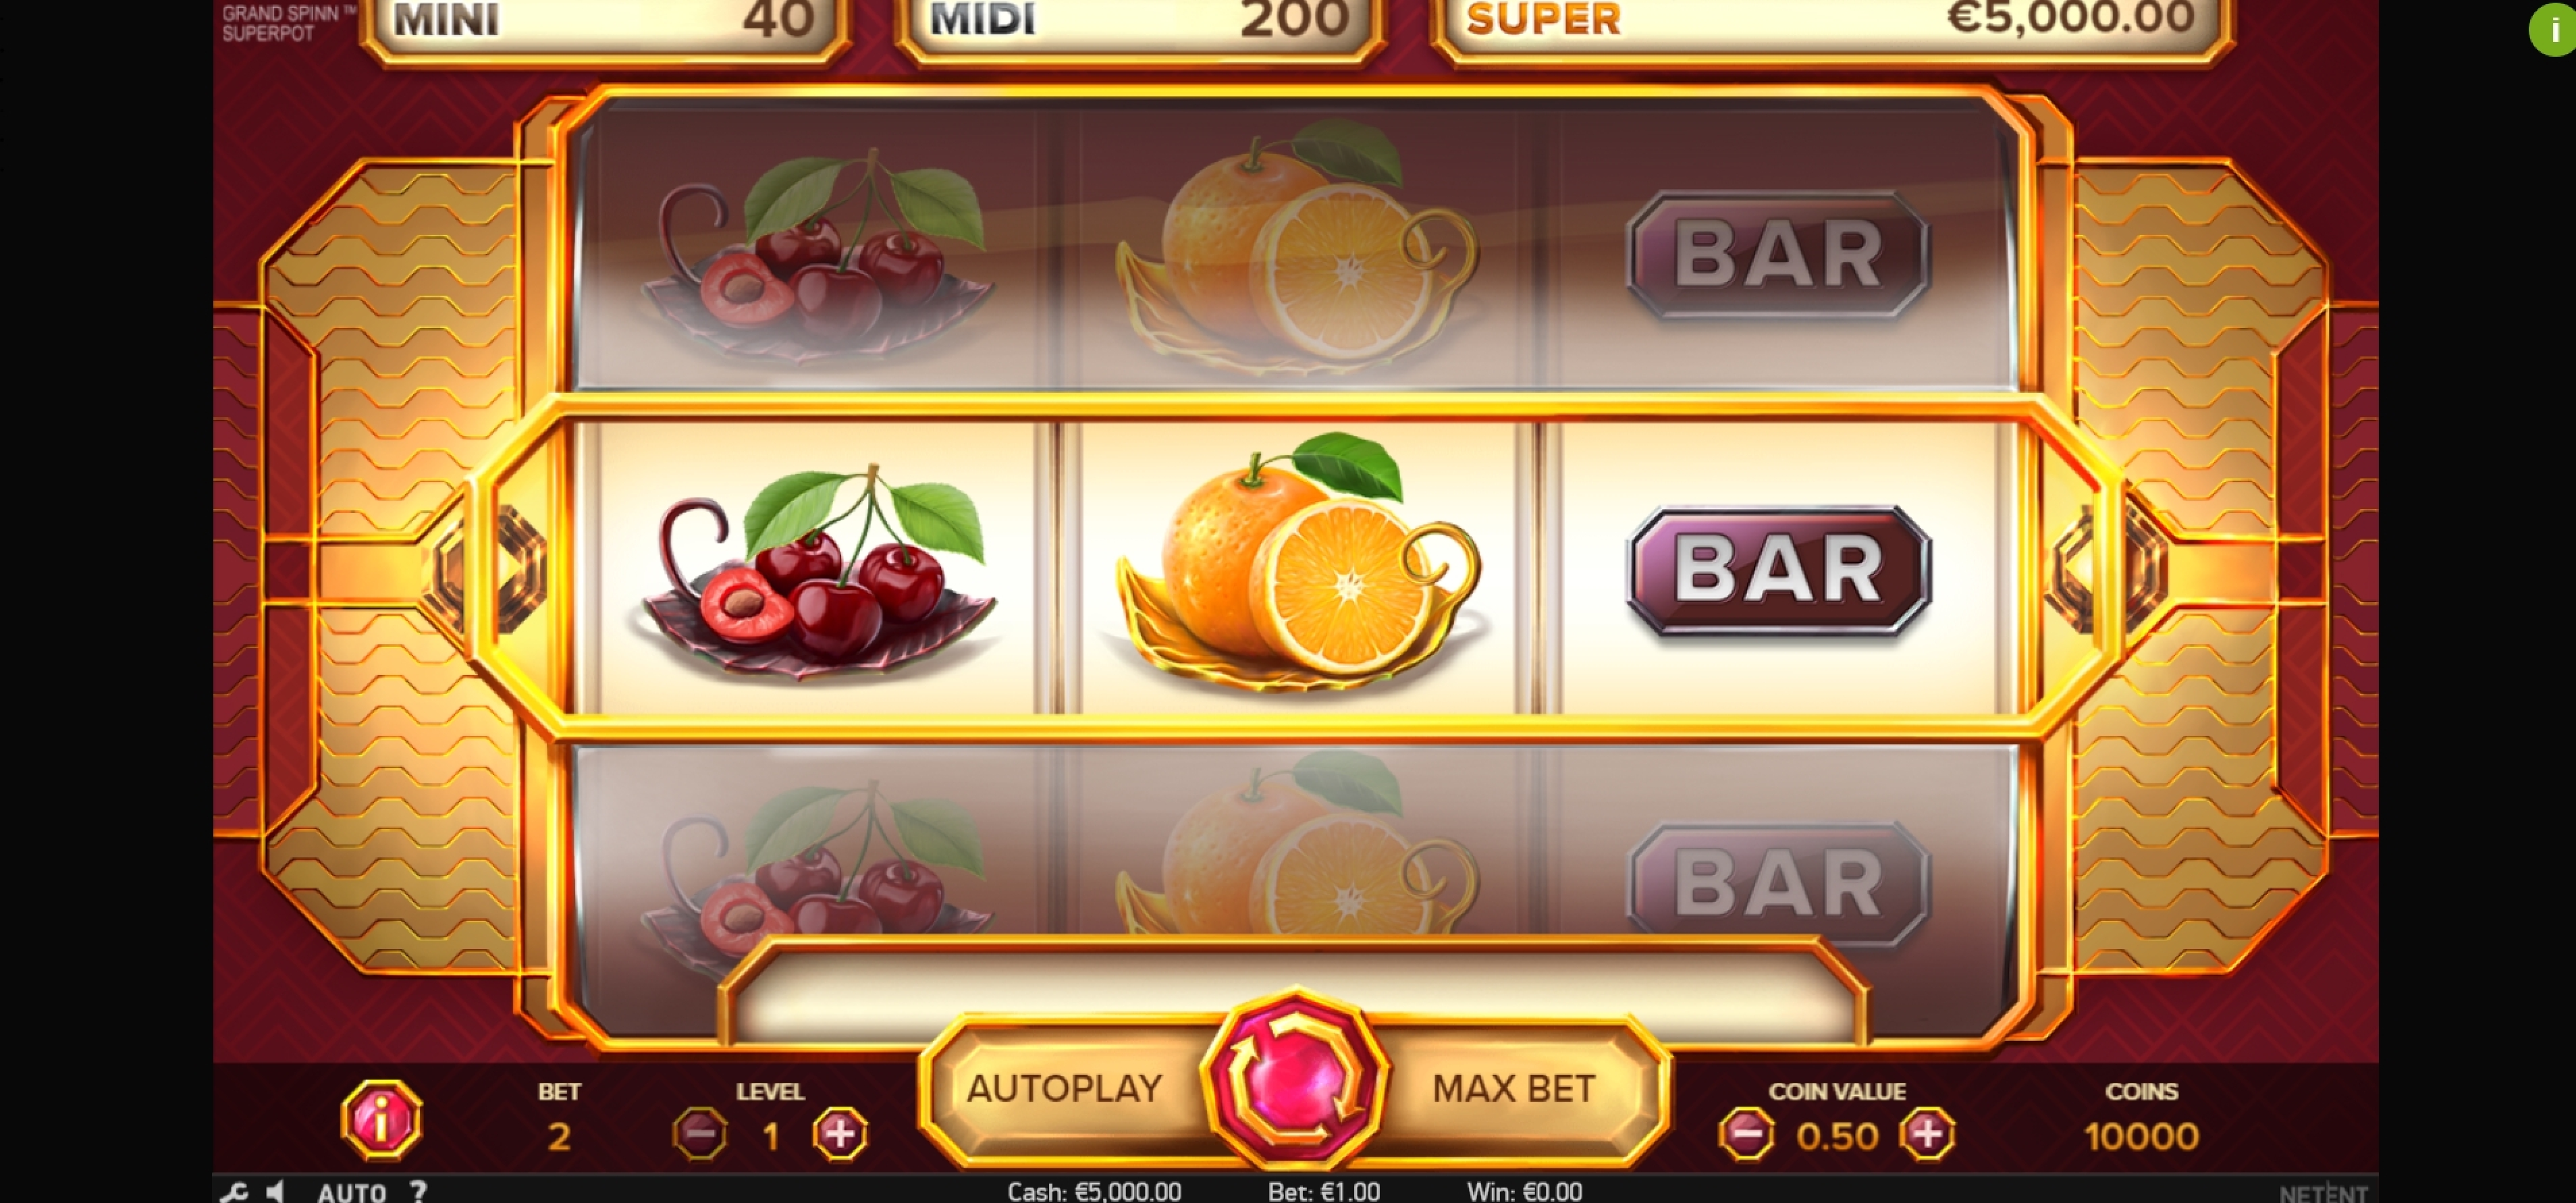 Reels in Grand Spinn Superpot Slot Game by NetEnt